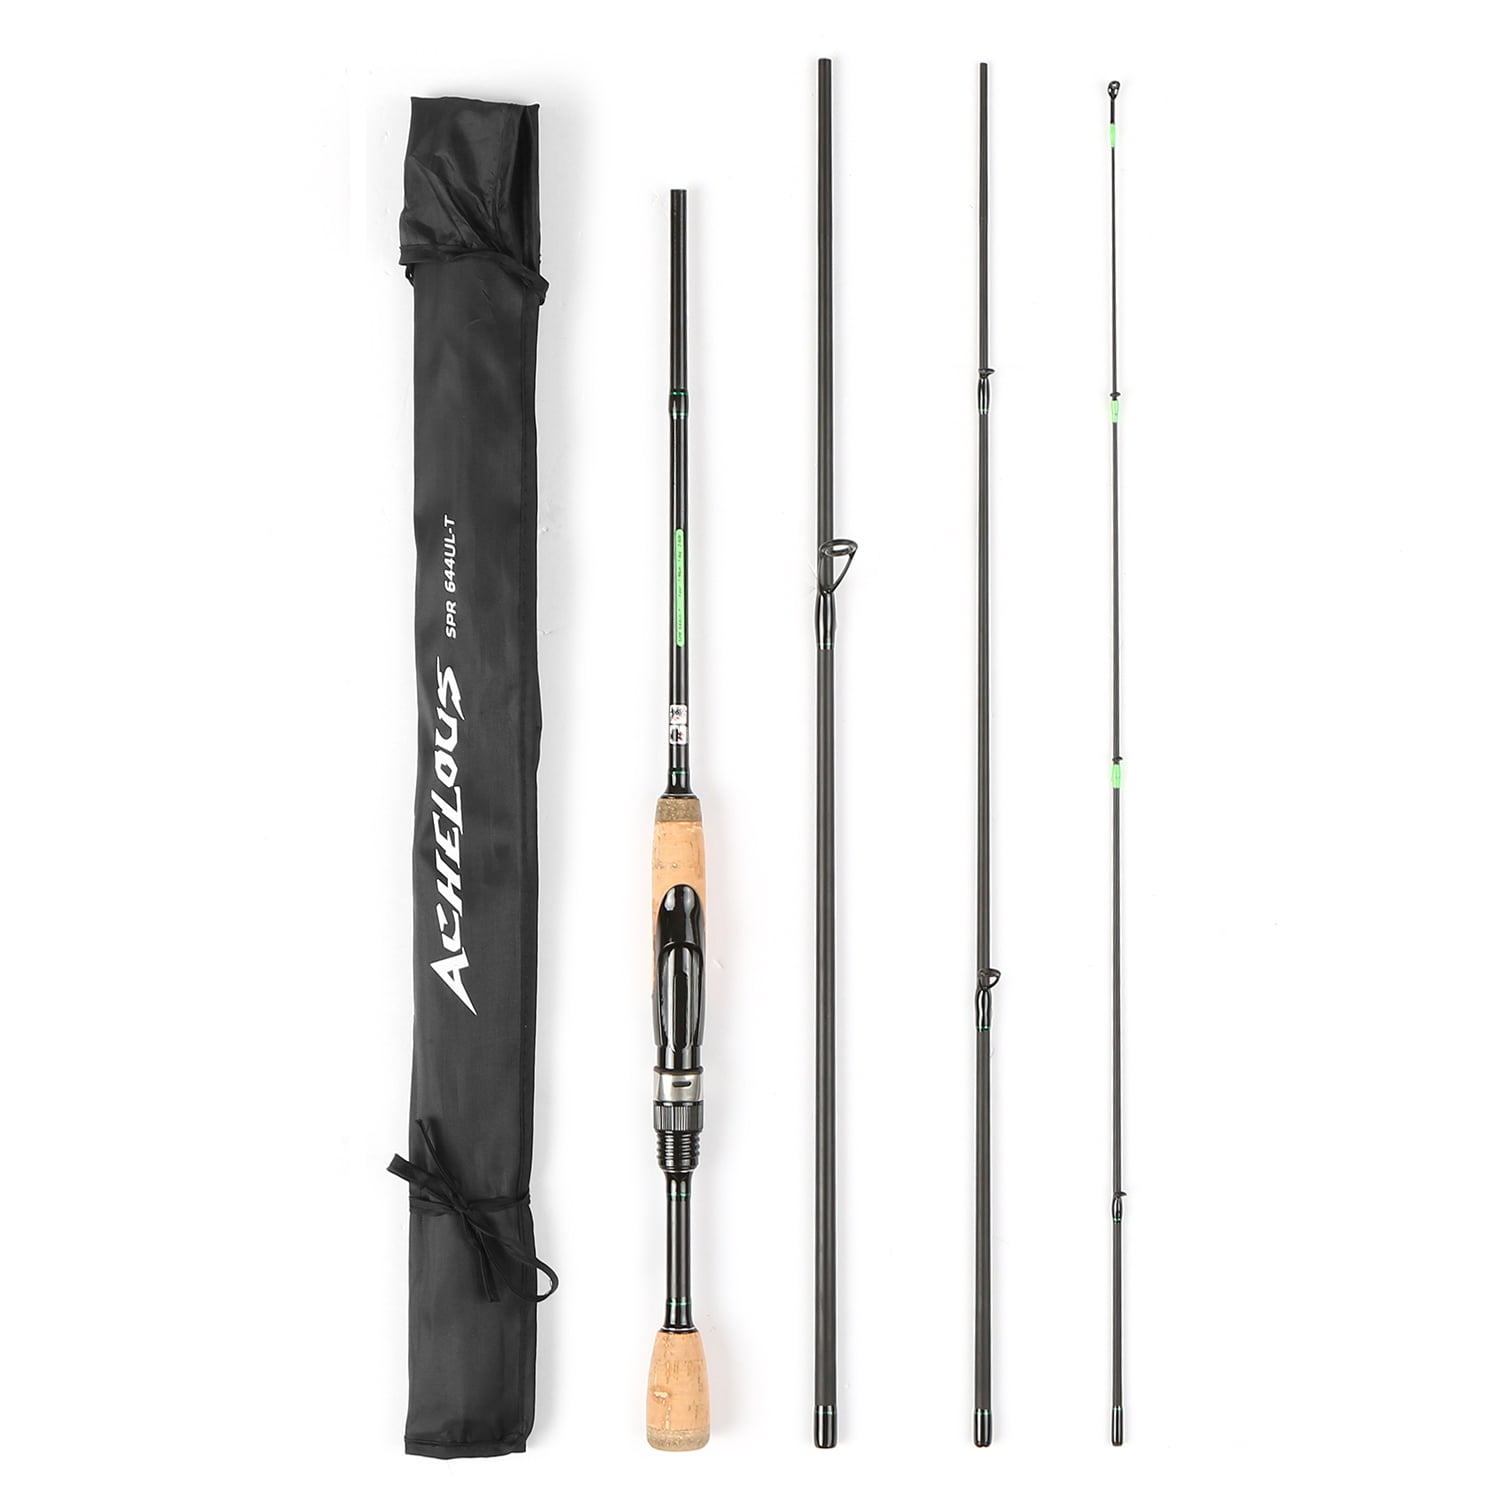 ACHELOUS Portable Travel Spinning Fishing Rod Lightweight Carbon